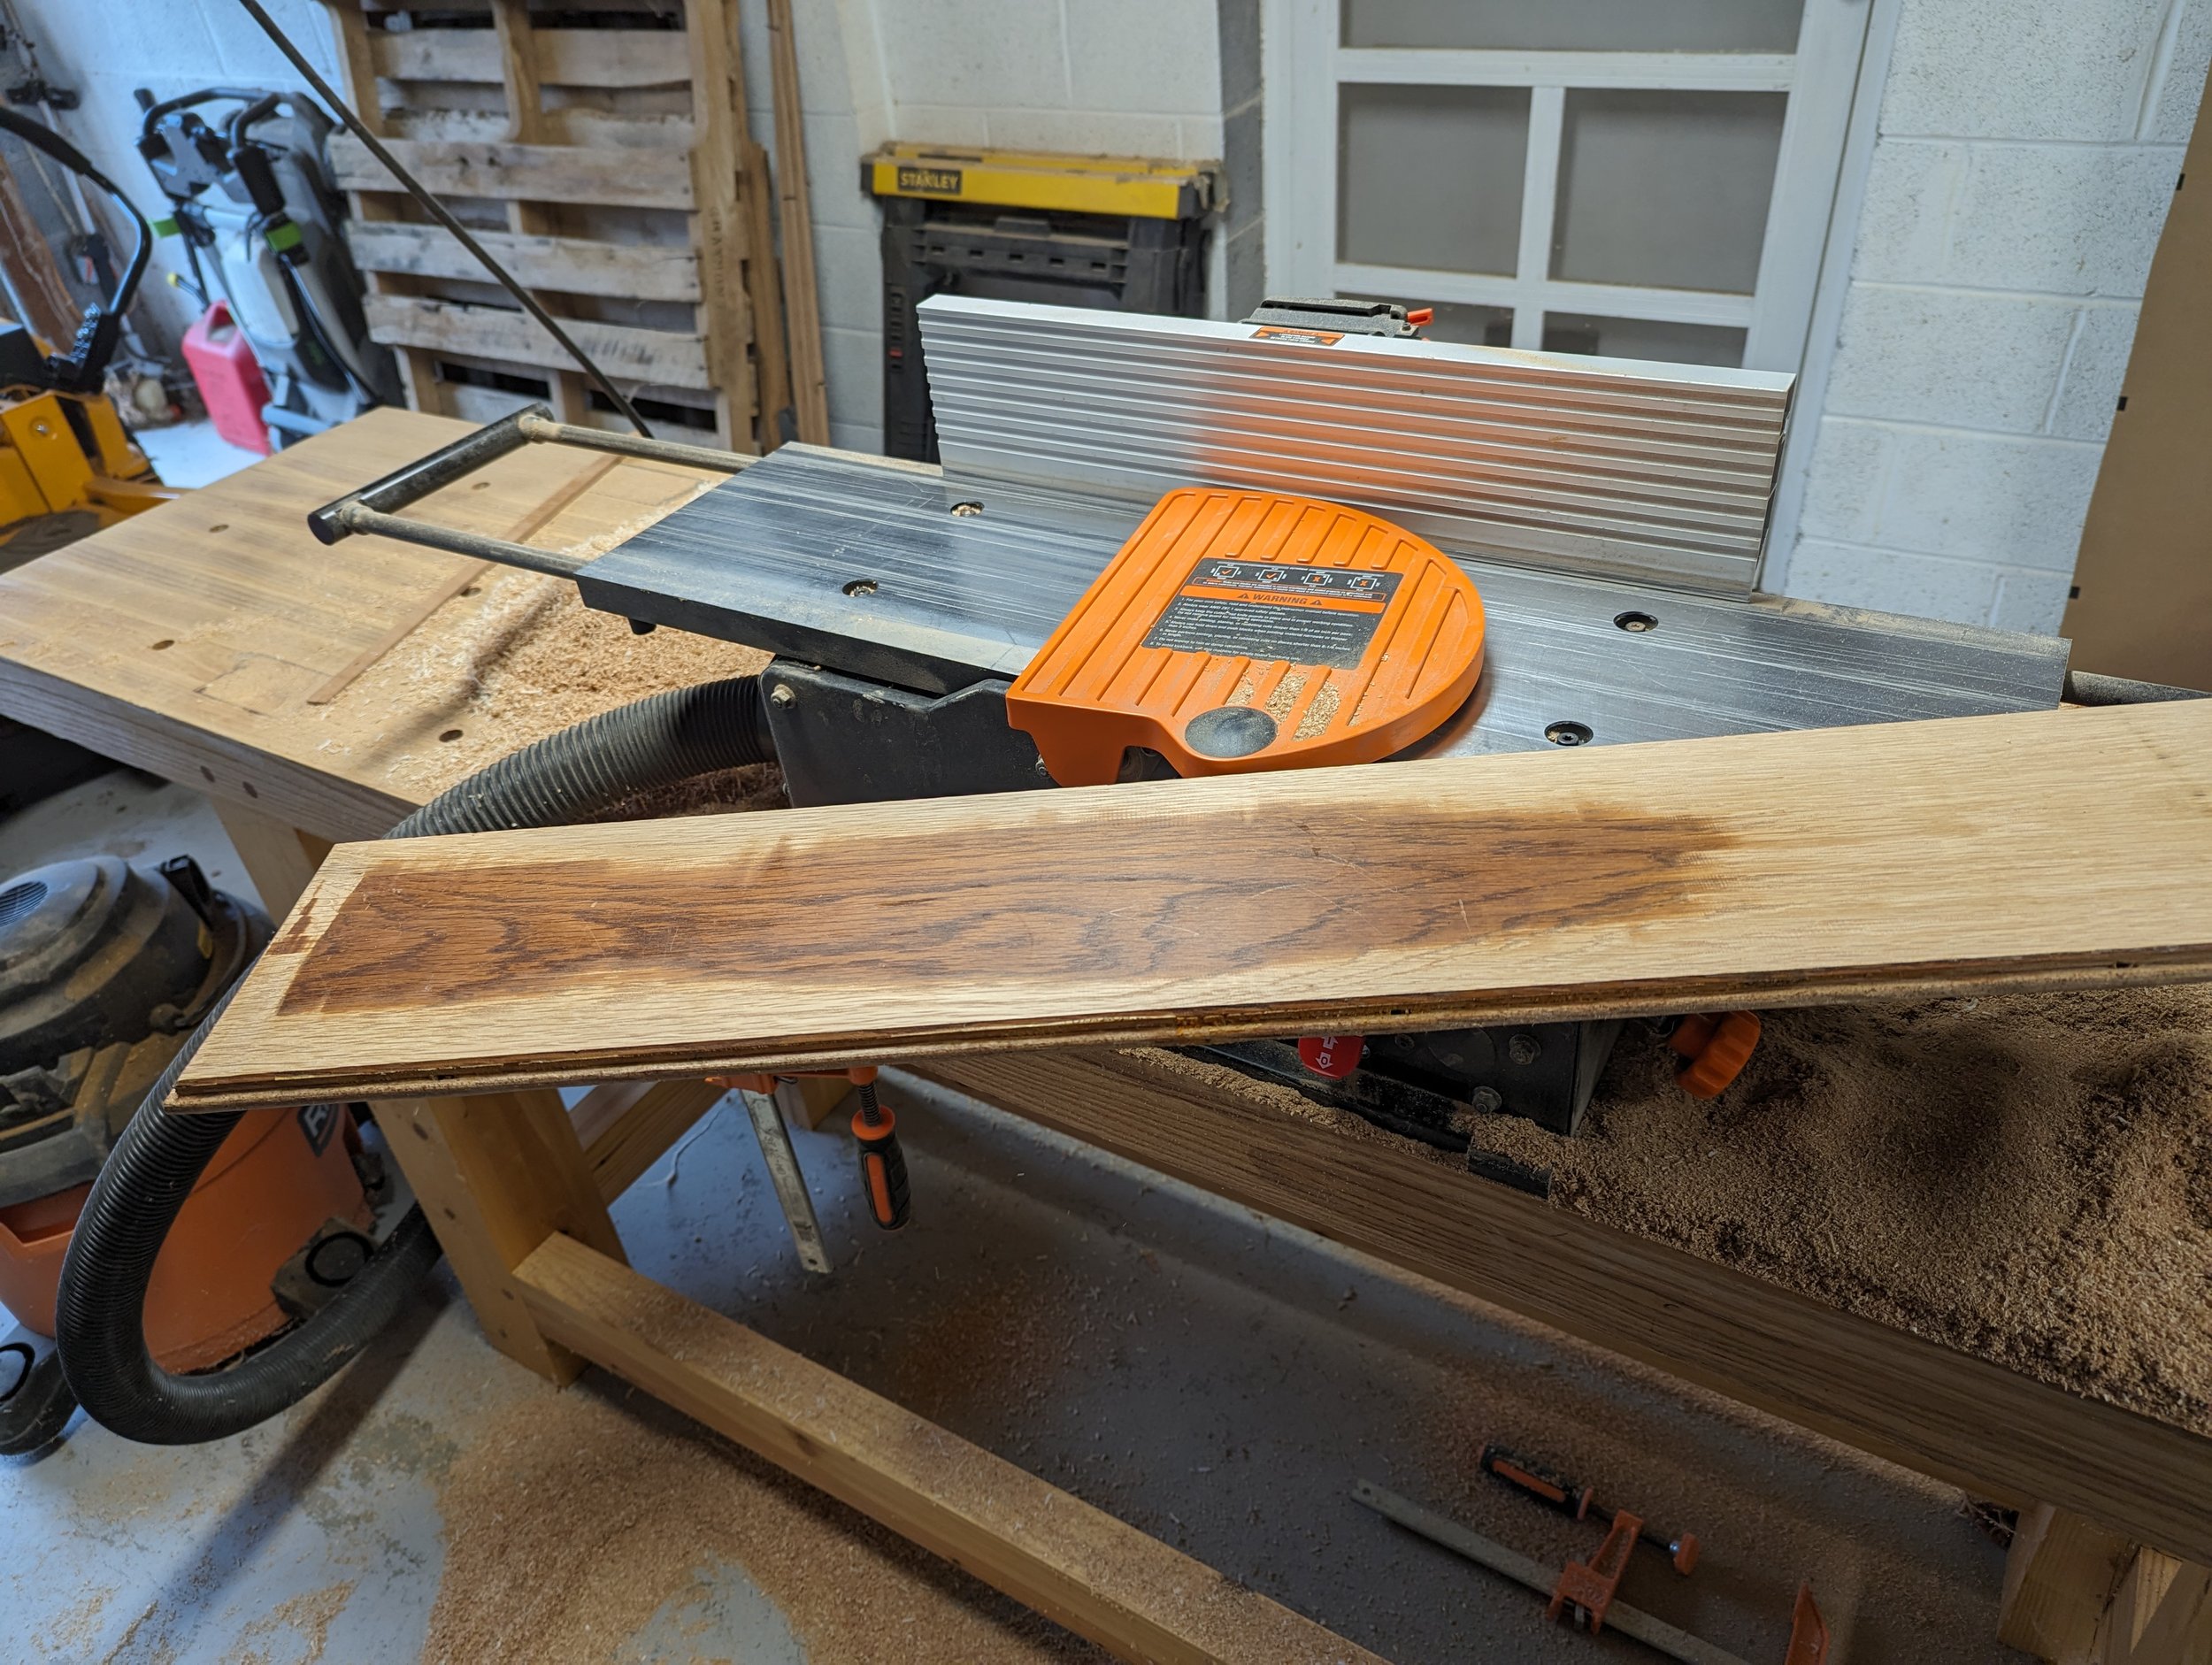  After the nails were removed, the boards were run through the jointer to remove the old finish and get the surfaces completely flat before they could be planed. This process takes an extremely long time, as each pass through the jointer takes off a 